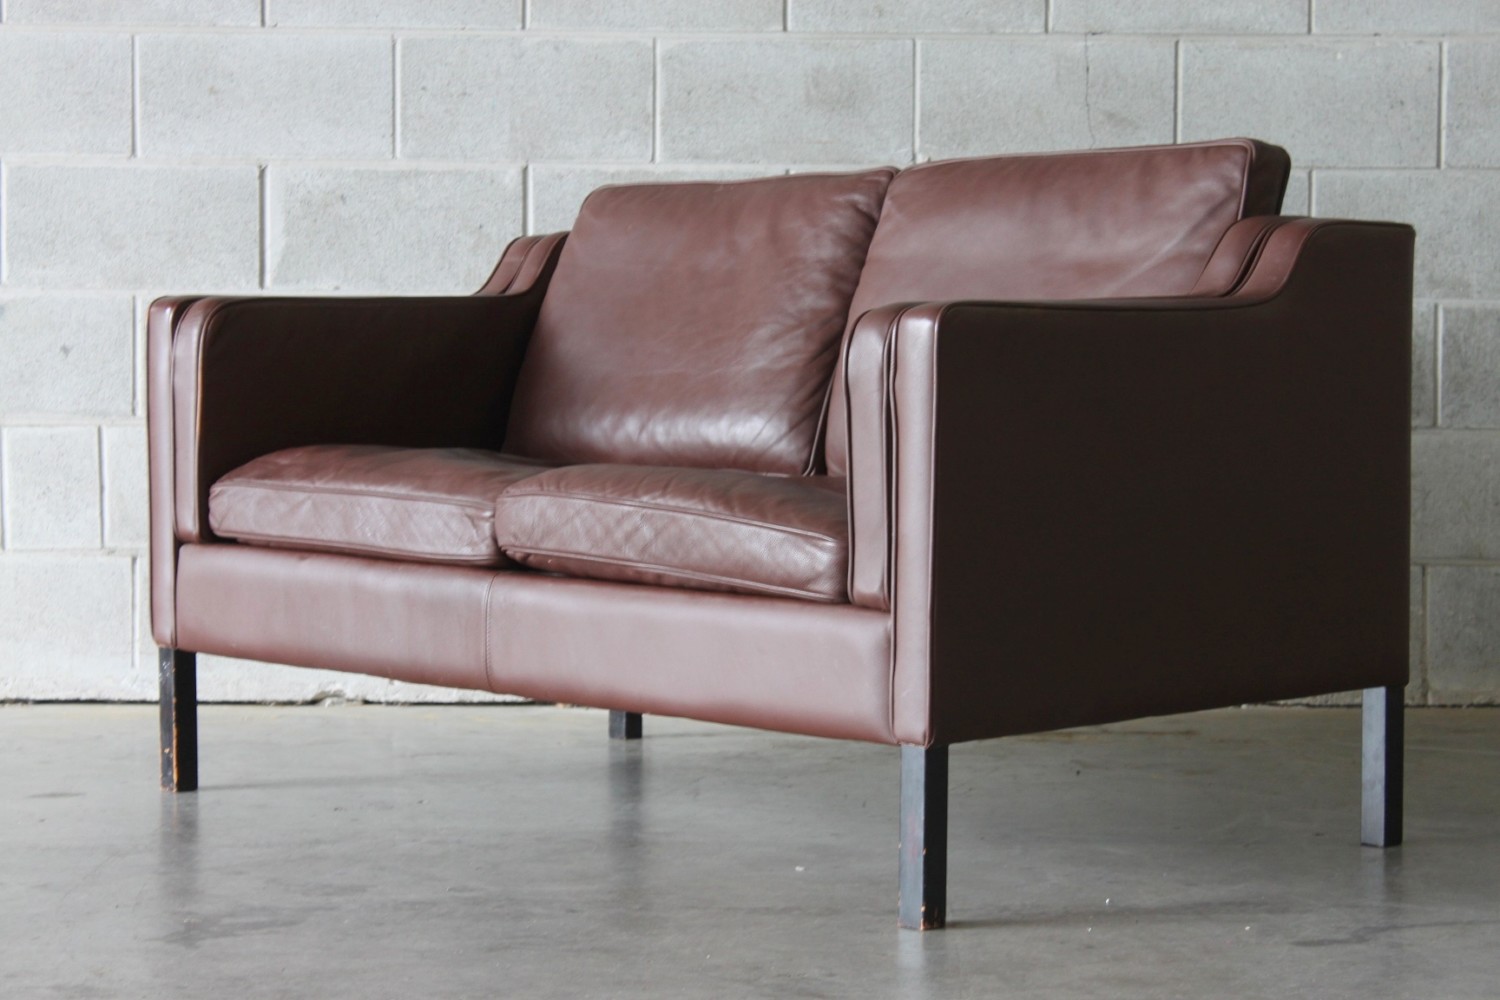 Pair of Brown Leather Sofas